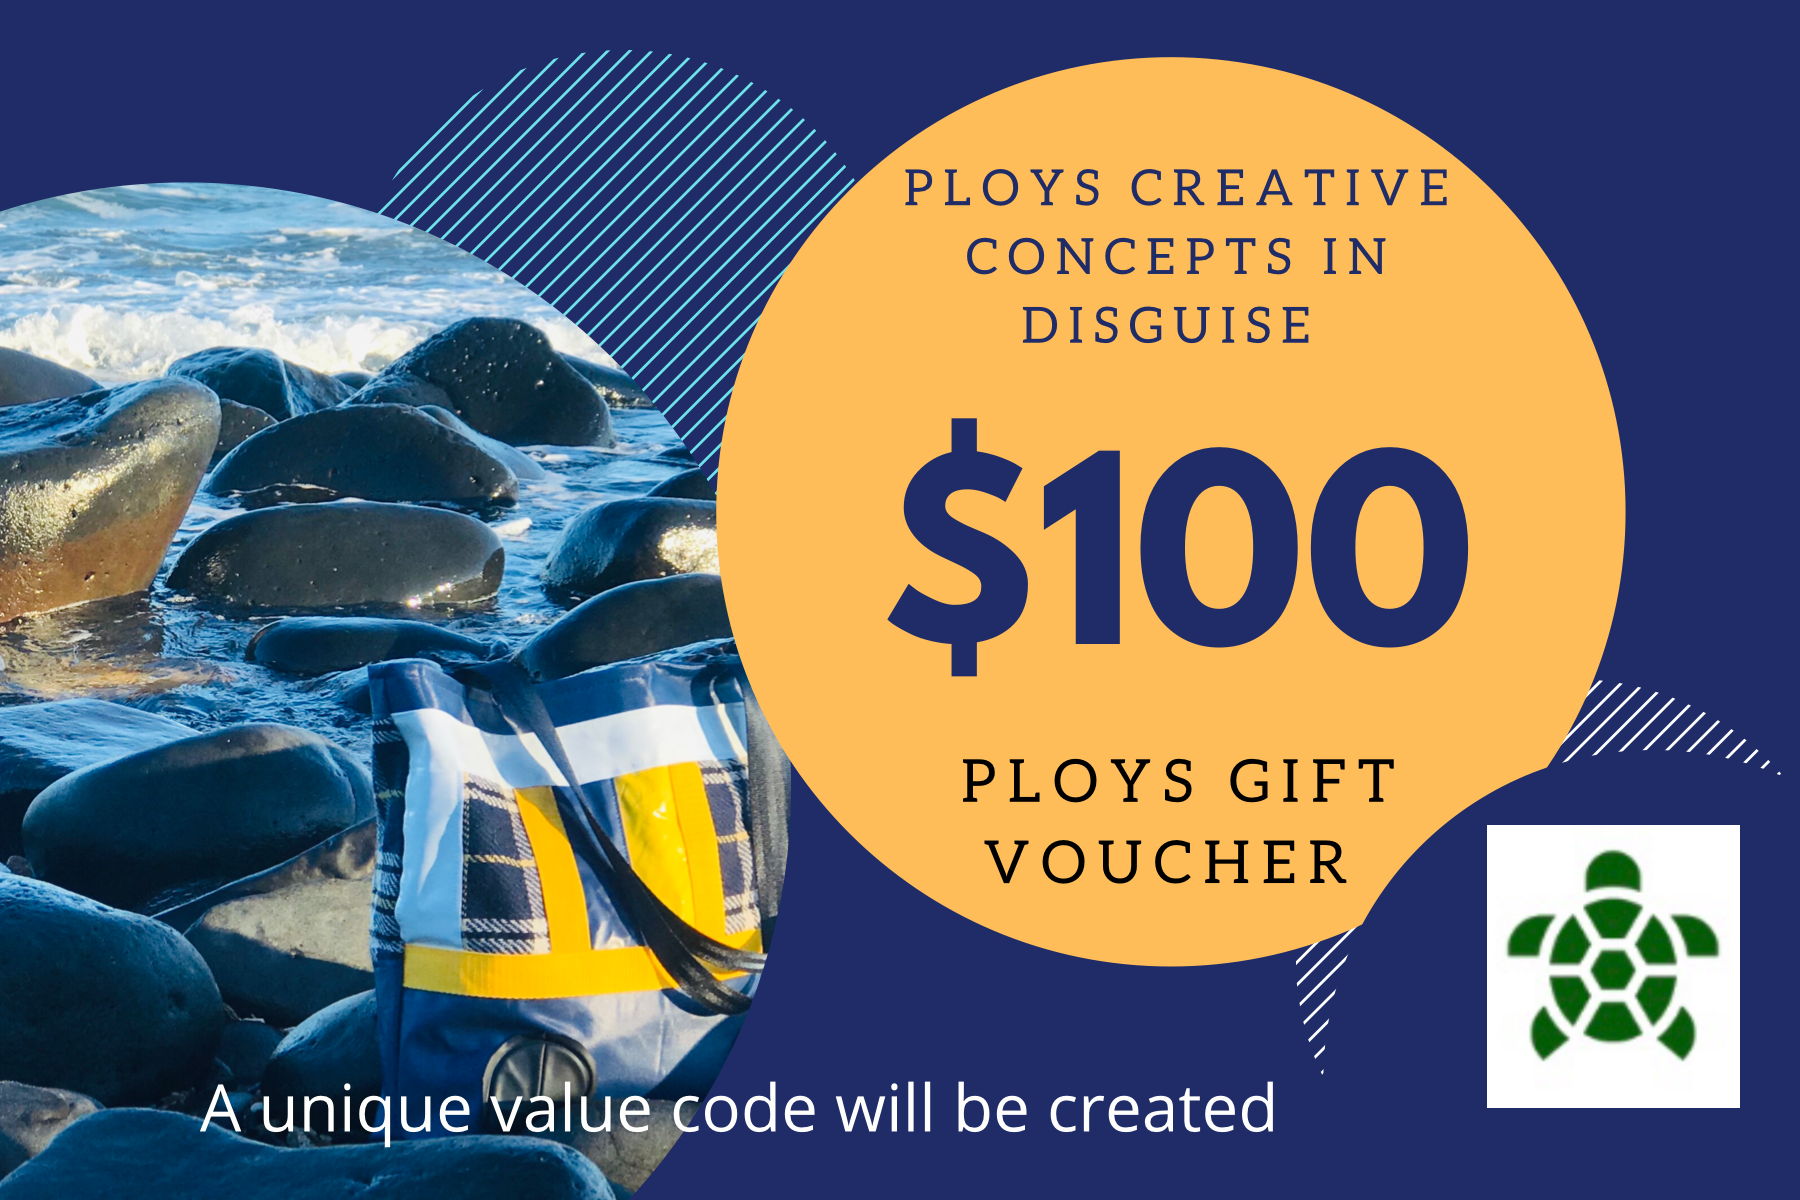 PLOYS bags from recycled pool inflatables gift vouchers $100